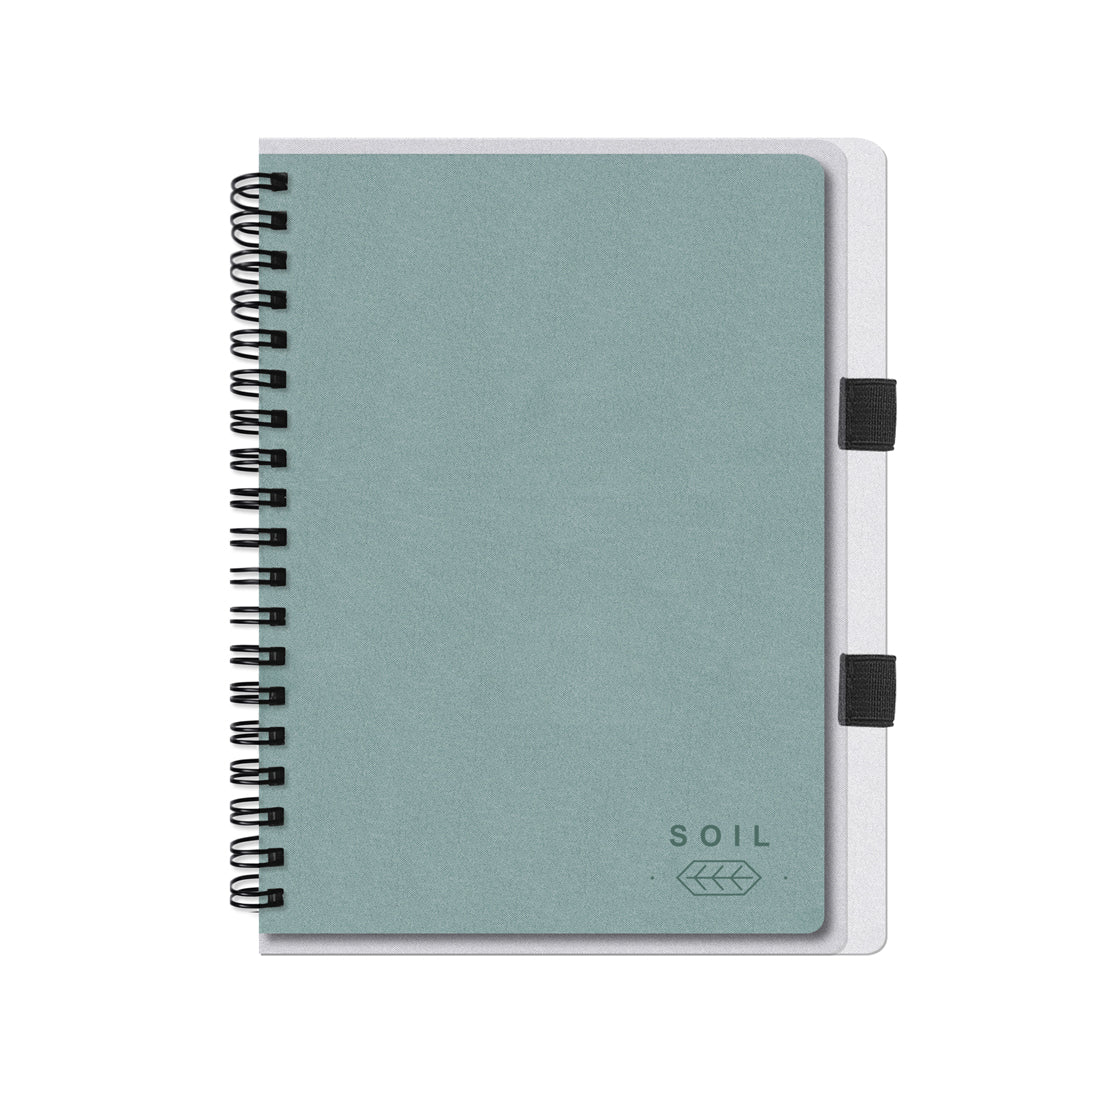 Soil Clear View Notebook